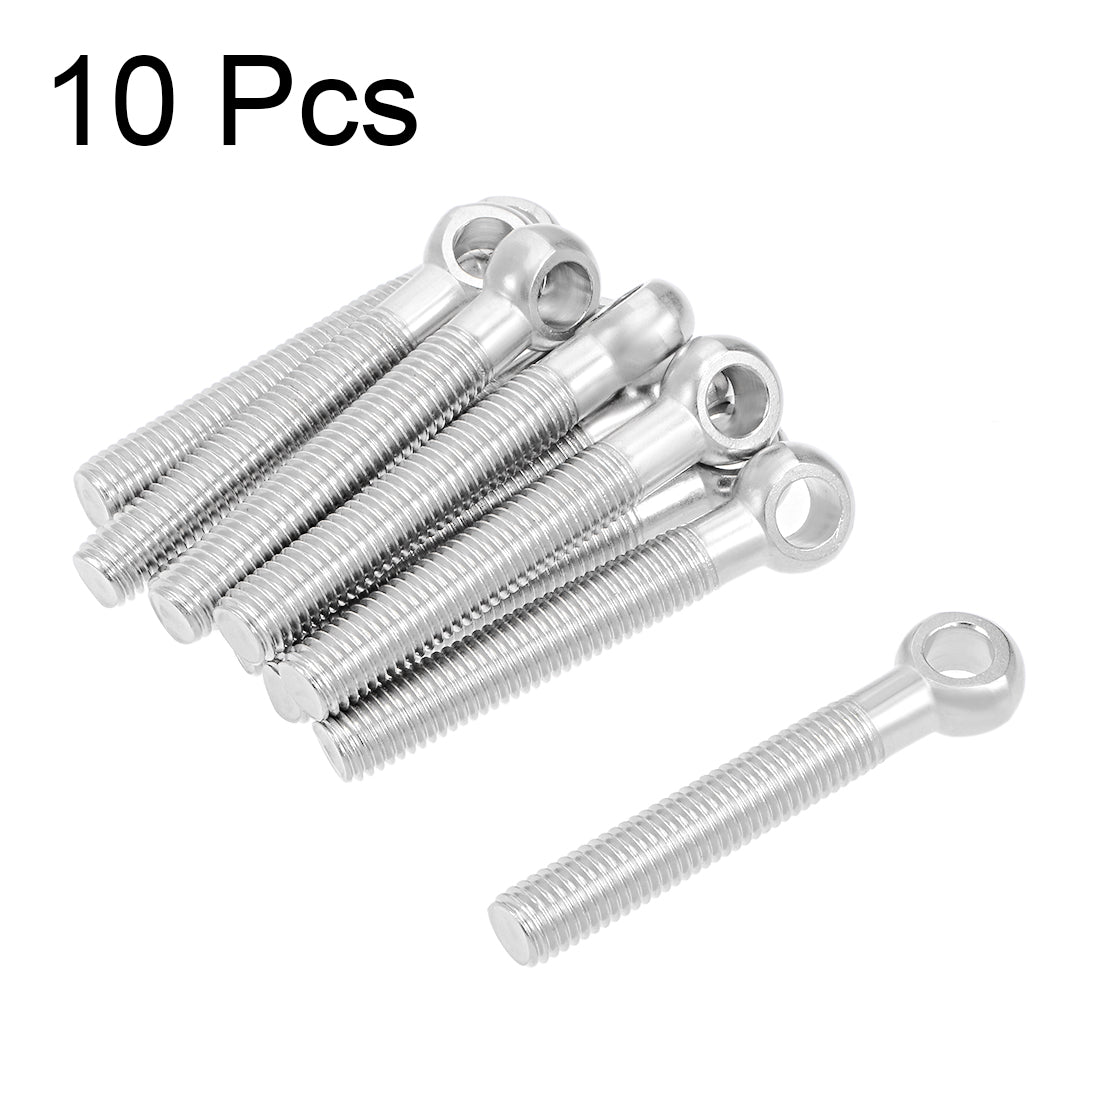 uxcell Uxcell M12 x 80mm 304 Stainless Steel Machine Shoulder Lift Eye Bolt Rigging 10pcs